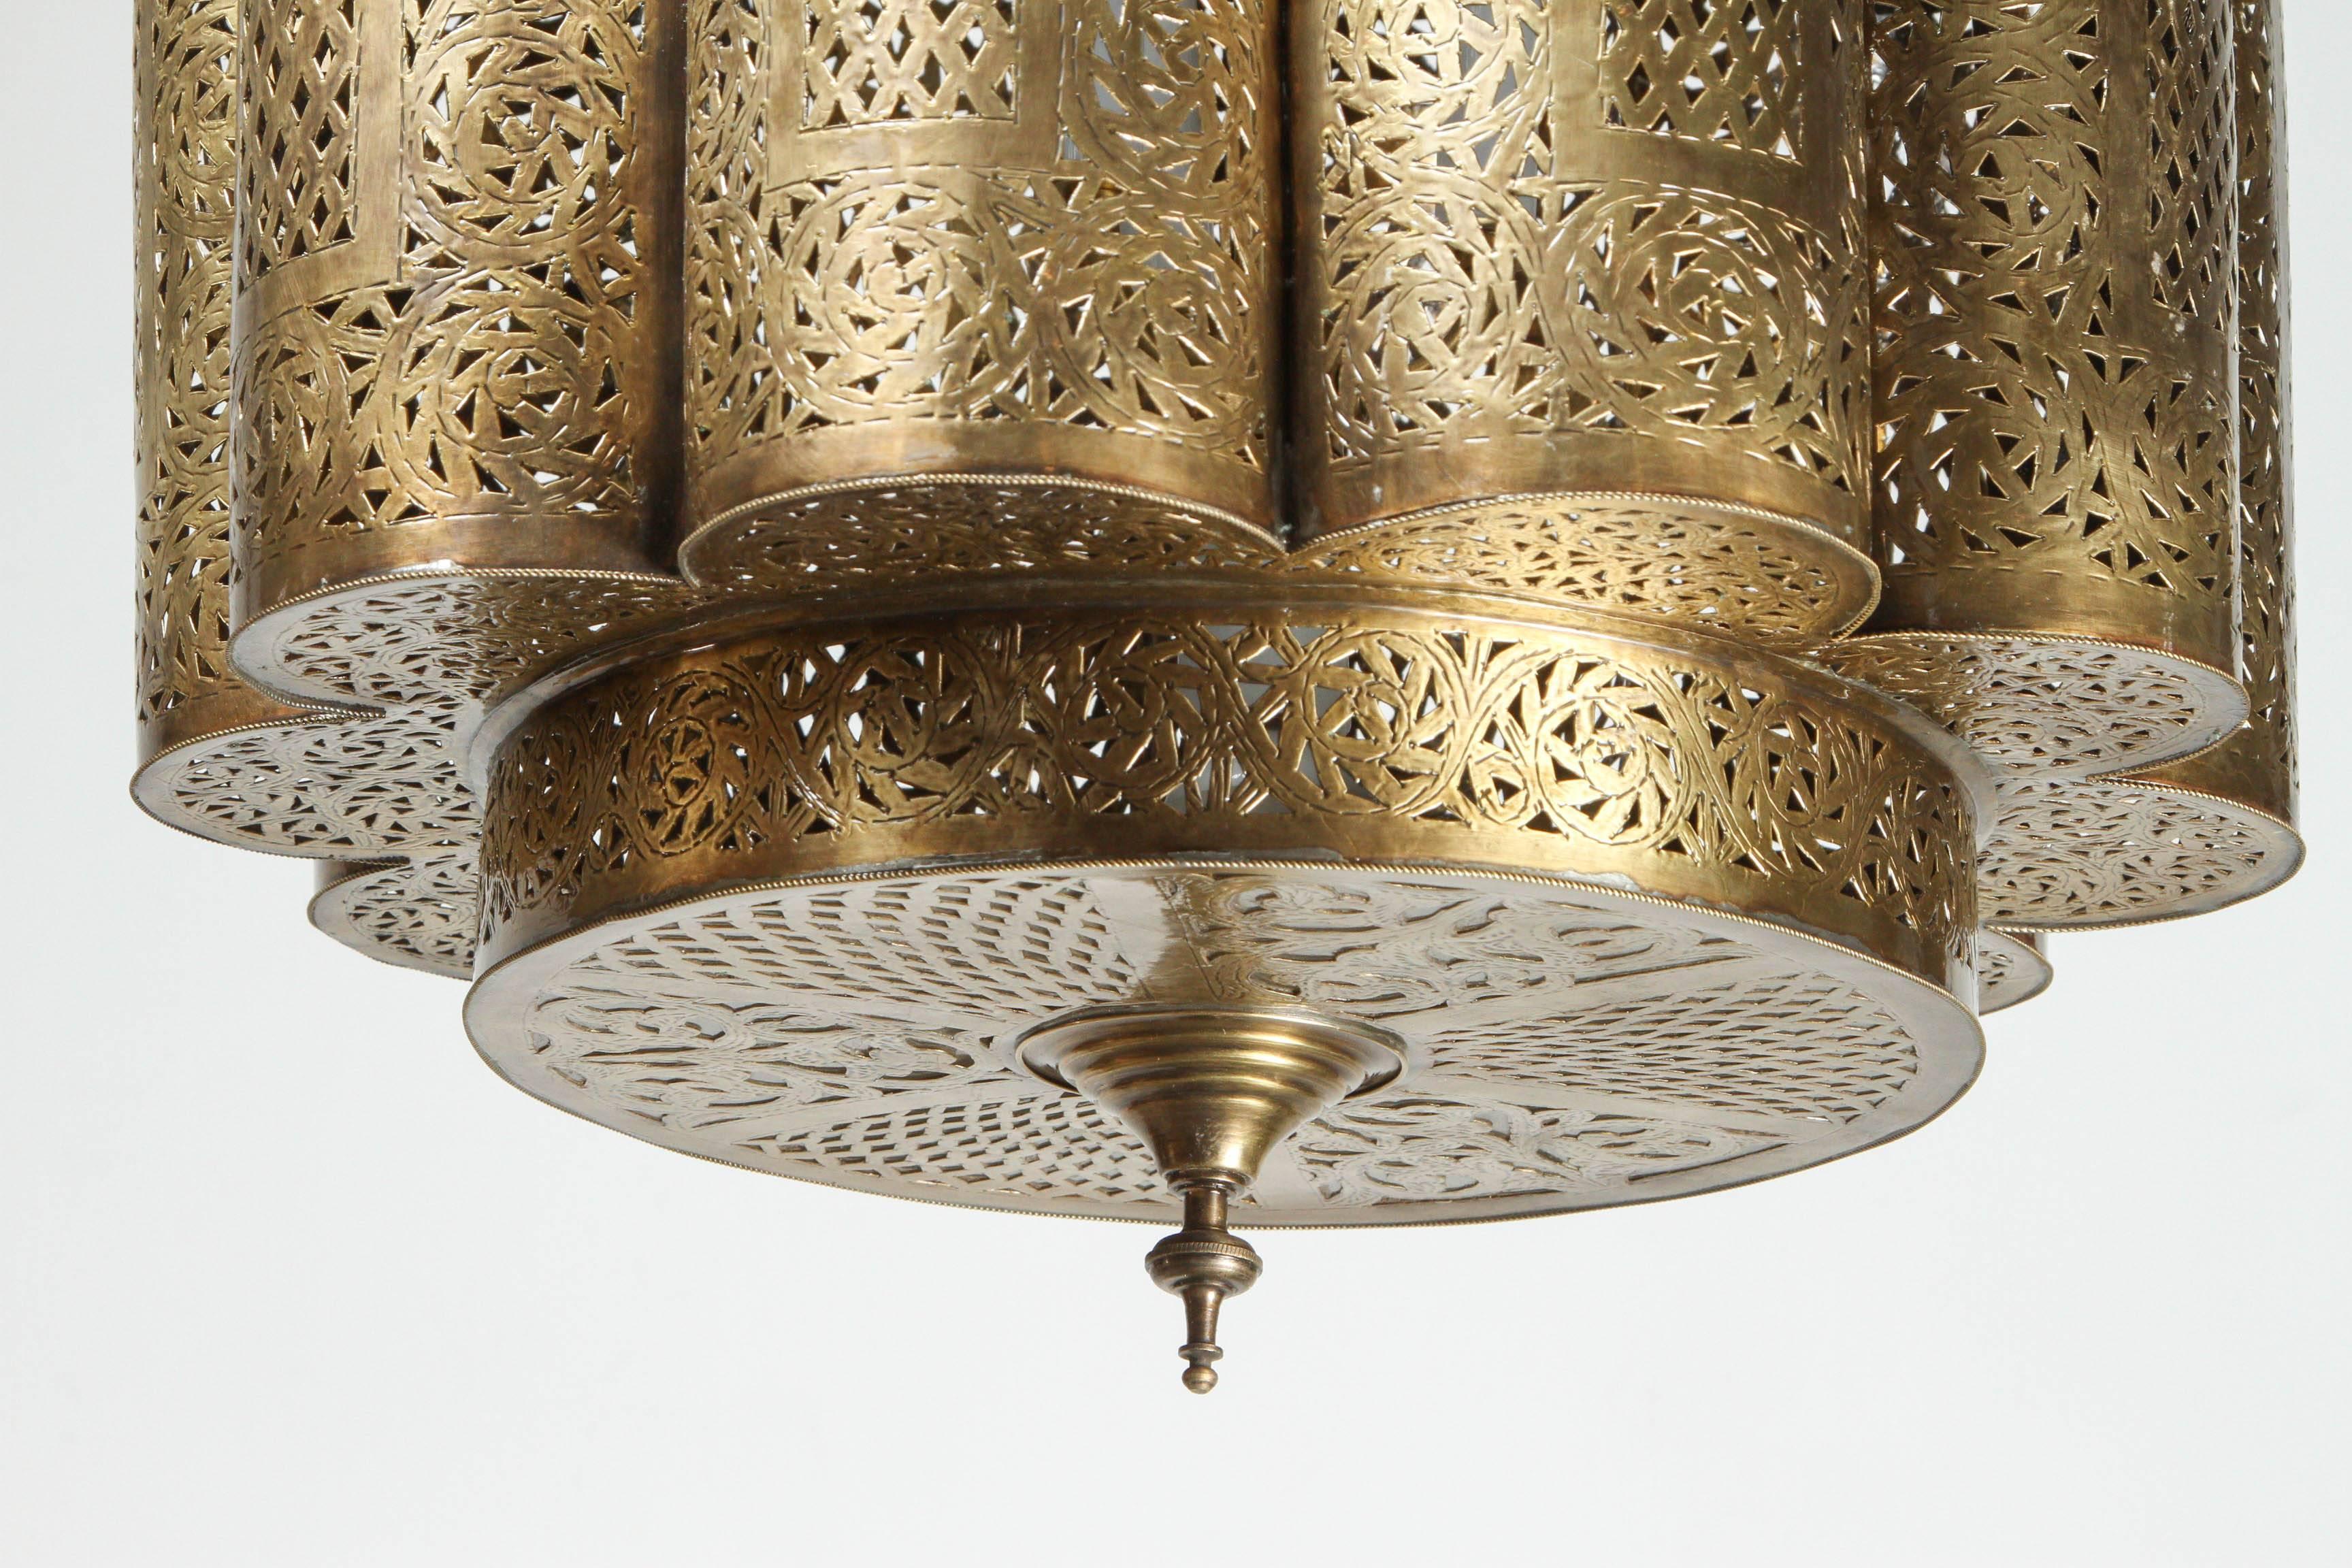 Large pair of pierced brass Moorish Moroccan chandelier in the style of Alberto Pinto design.
This Moorish light fixture is delicately handcrafted, hand-hammered and chiselled with Fine Moorish filigree designs by skilled Moroccan artisans.
The size